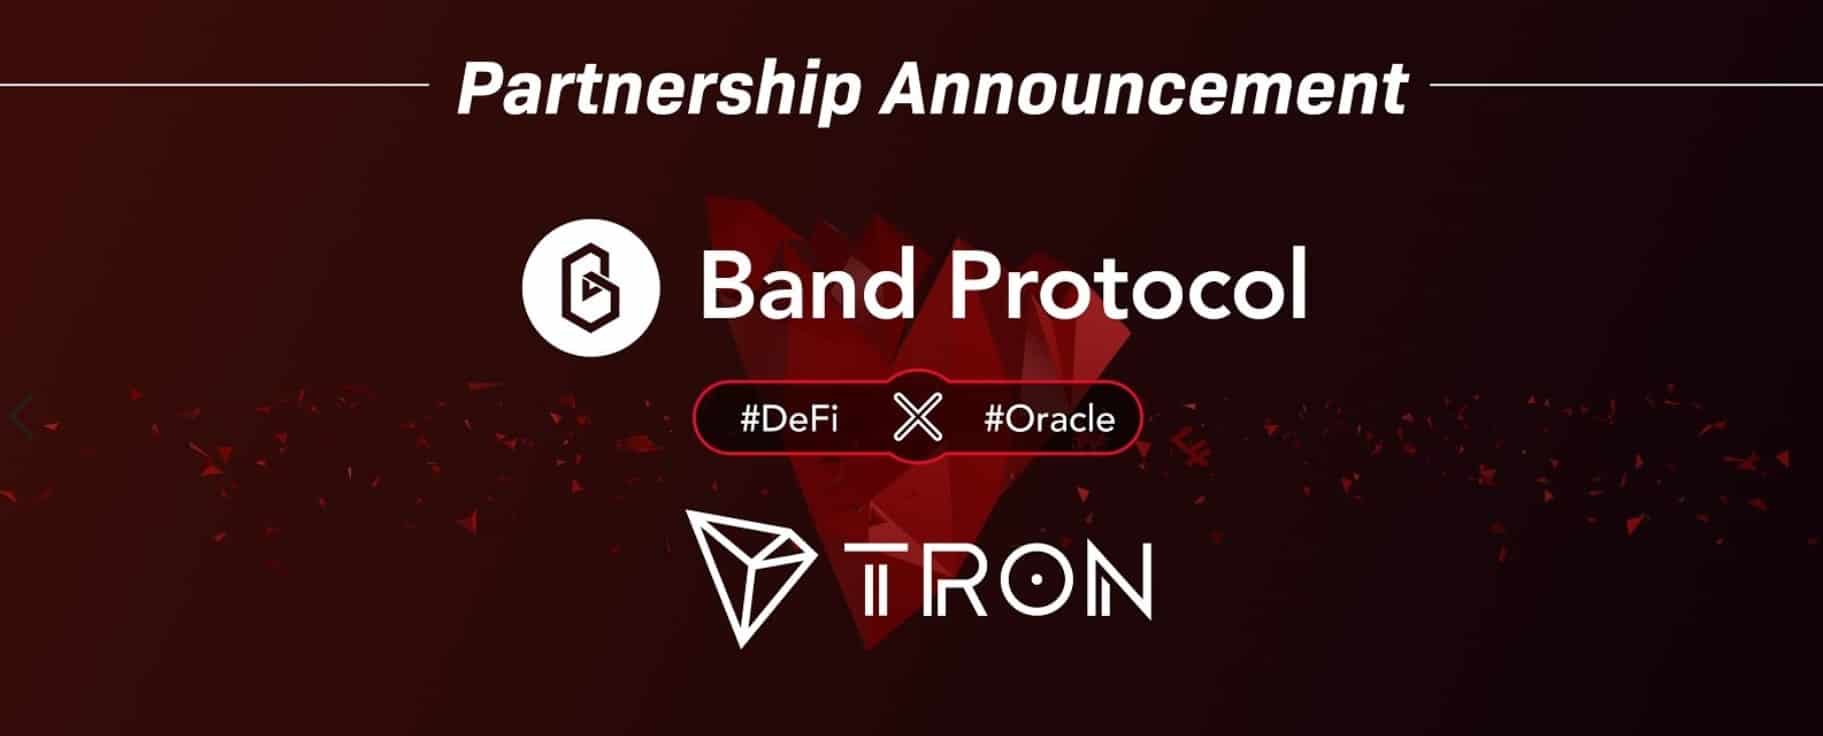 Tron-partners-with-band-to-deliver-on-chain-oracles-for-defi